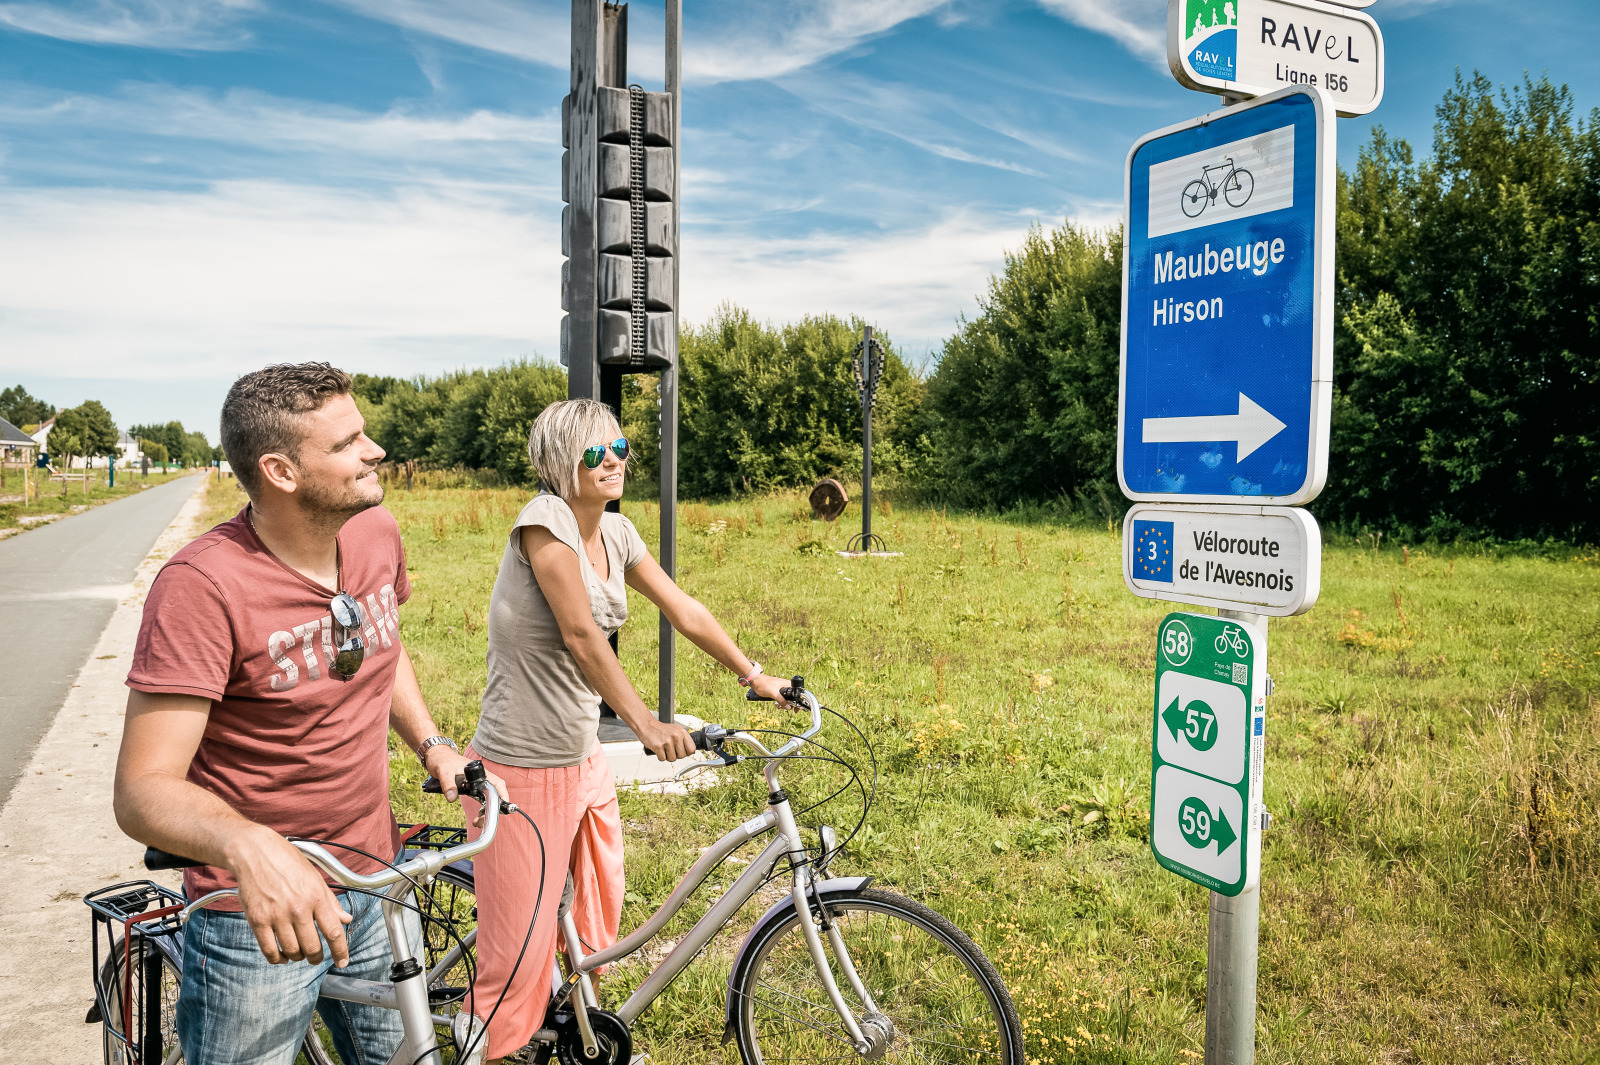 Couple in front of a RAVeL sign in the province of Hainaut